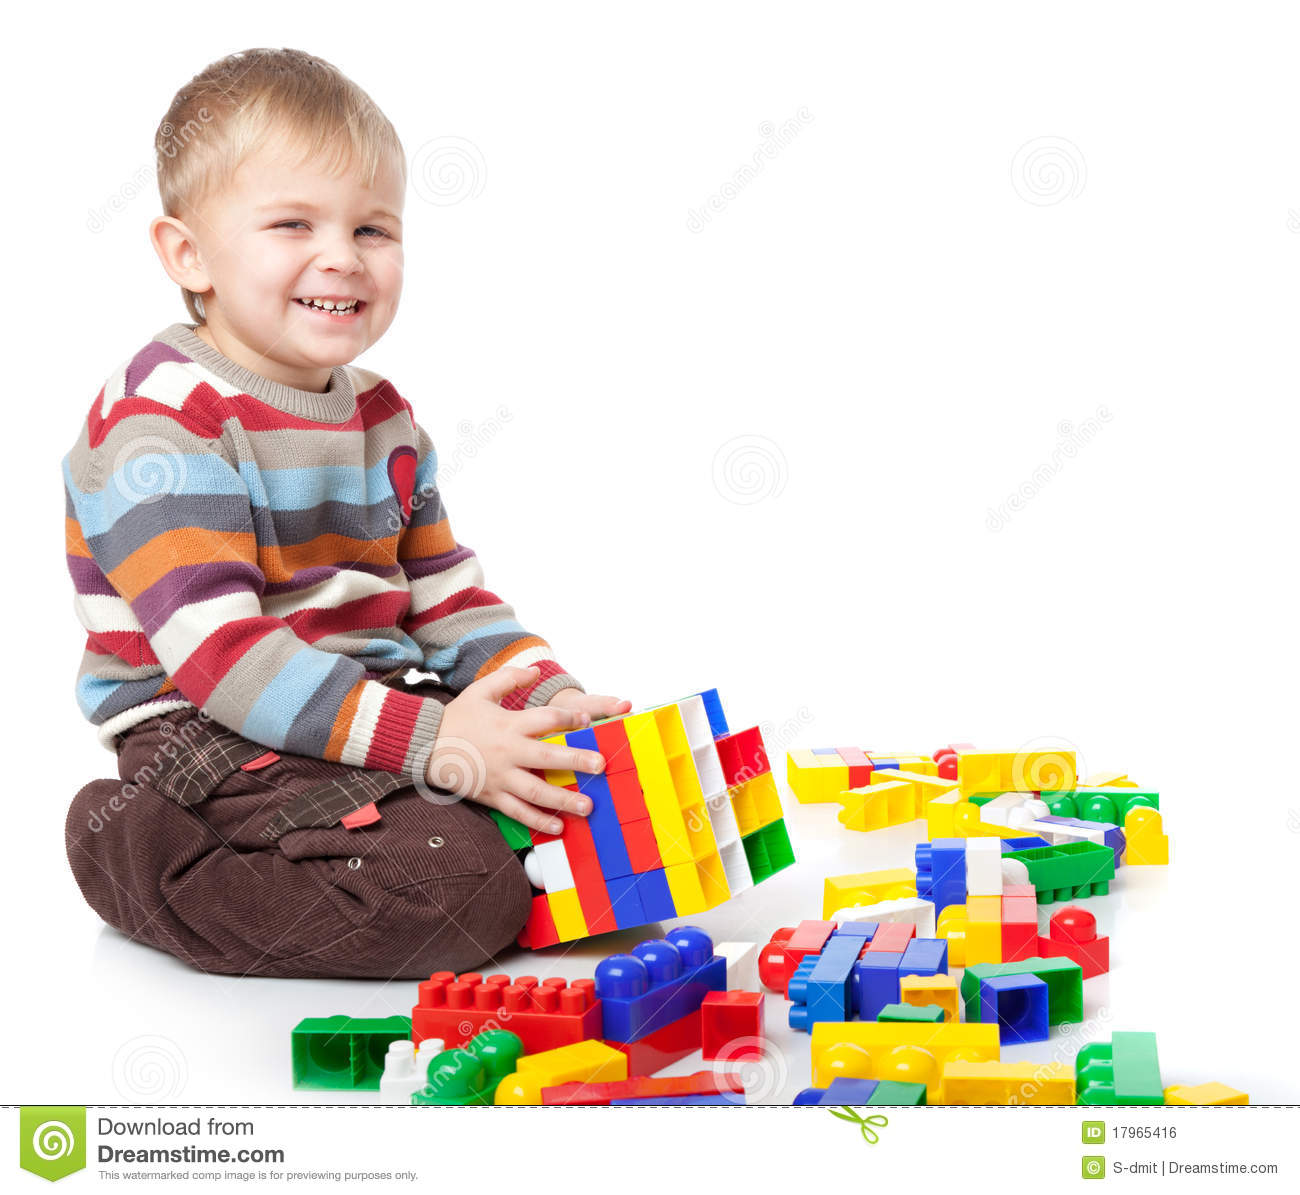 Lego Construction People Funny   Lego Construction People Funny  8